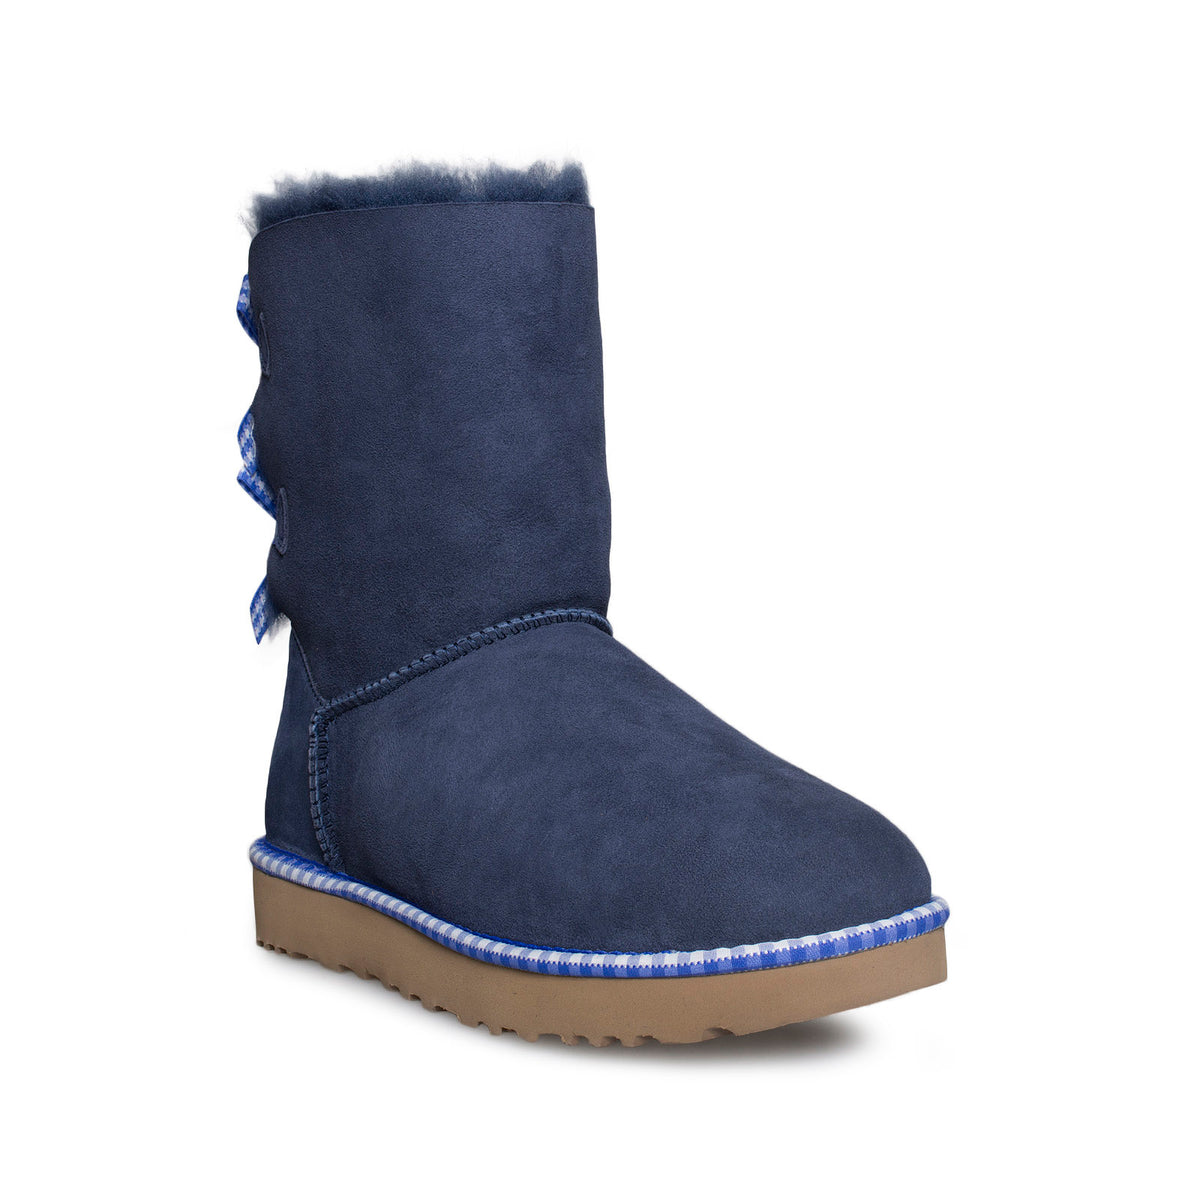 UGG Bailey Bow Gingham Navy Boots - Women's – MyCozyBoots